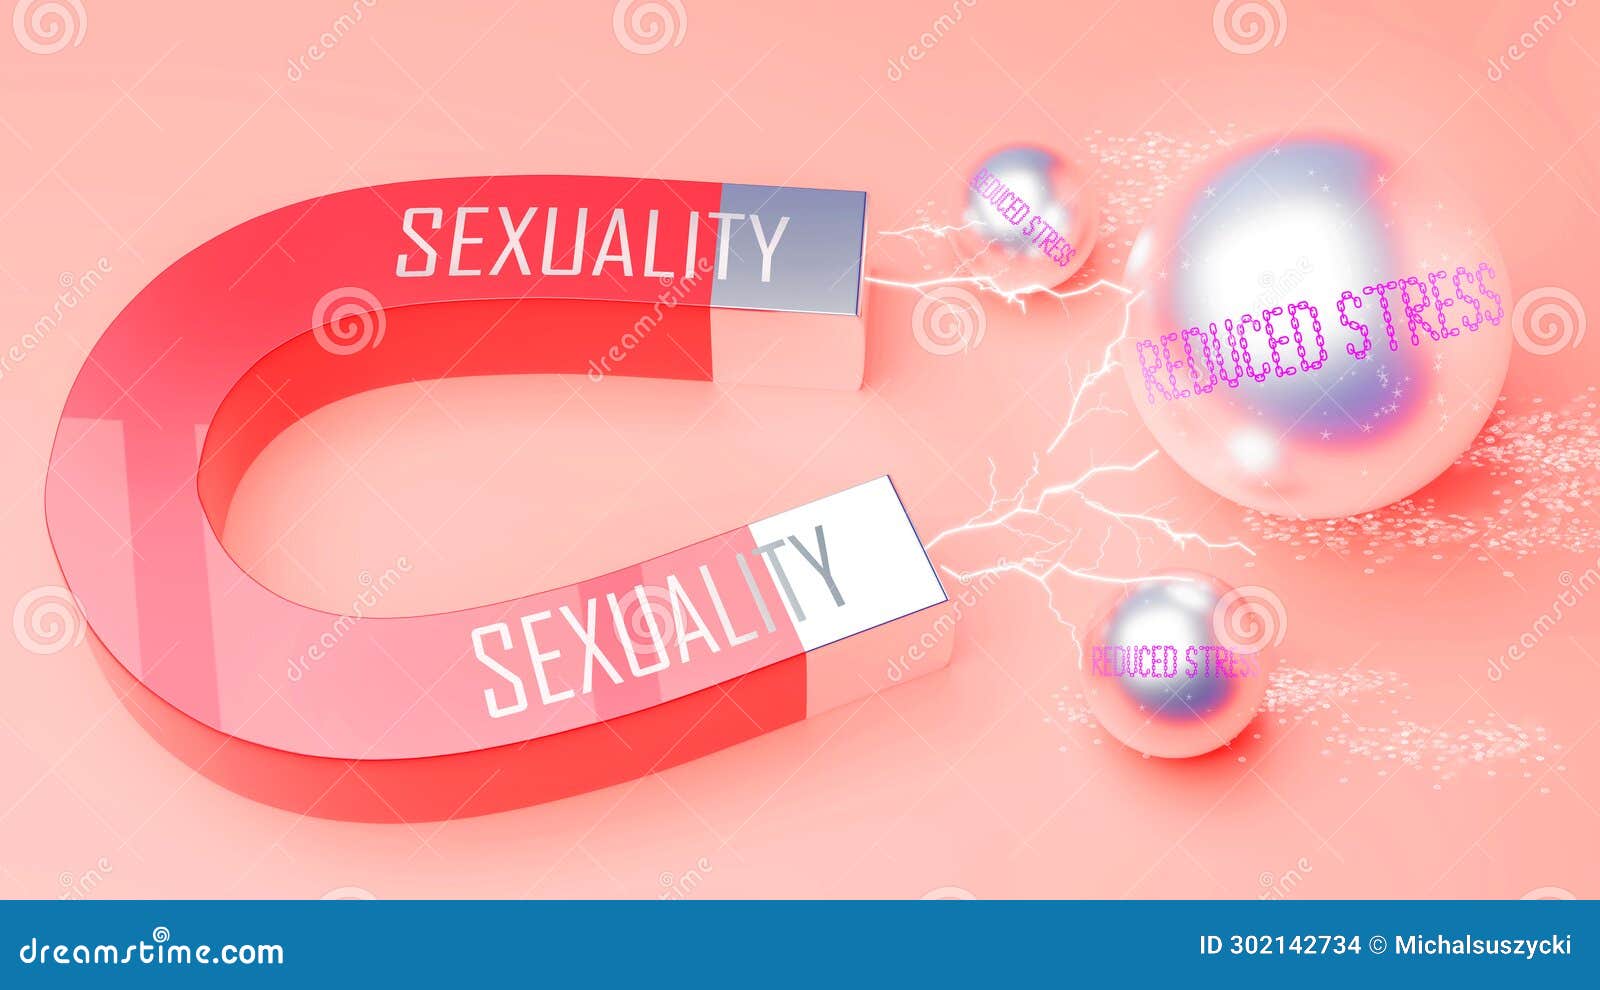 sexuality attracts reduced stress. a magnet metaphor in which sexuality attracts multiple parts of reduced stress. cause and